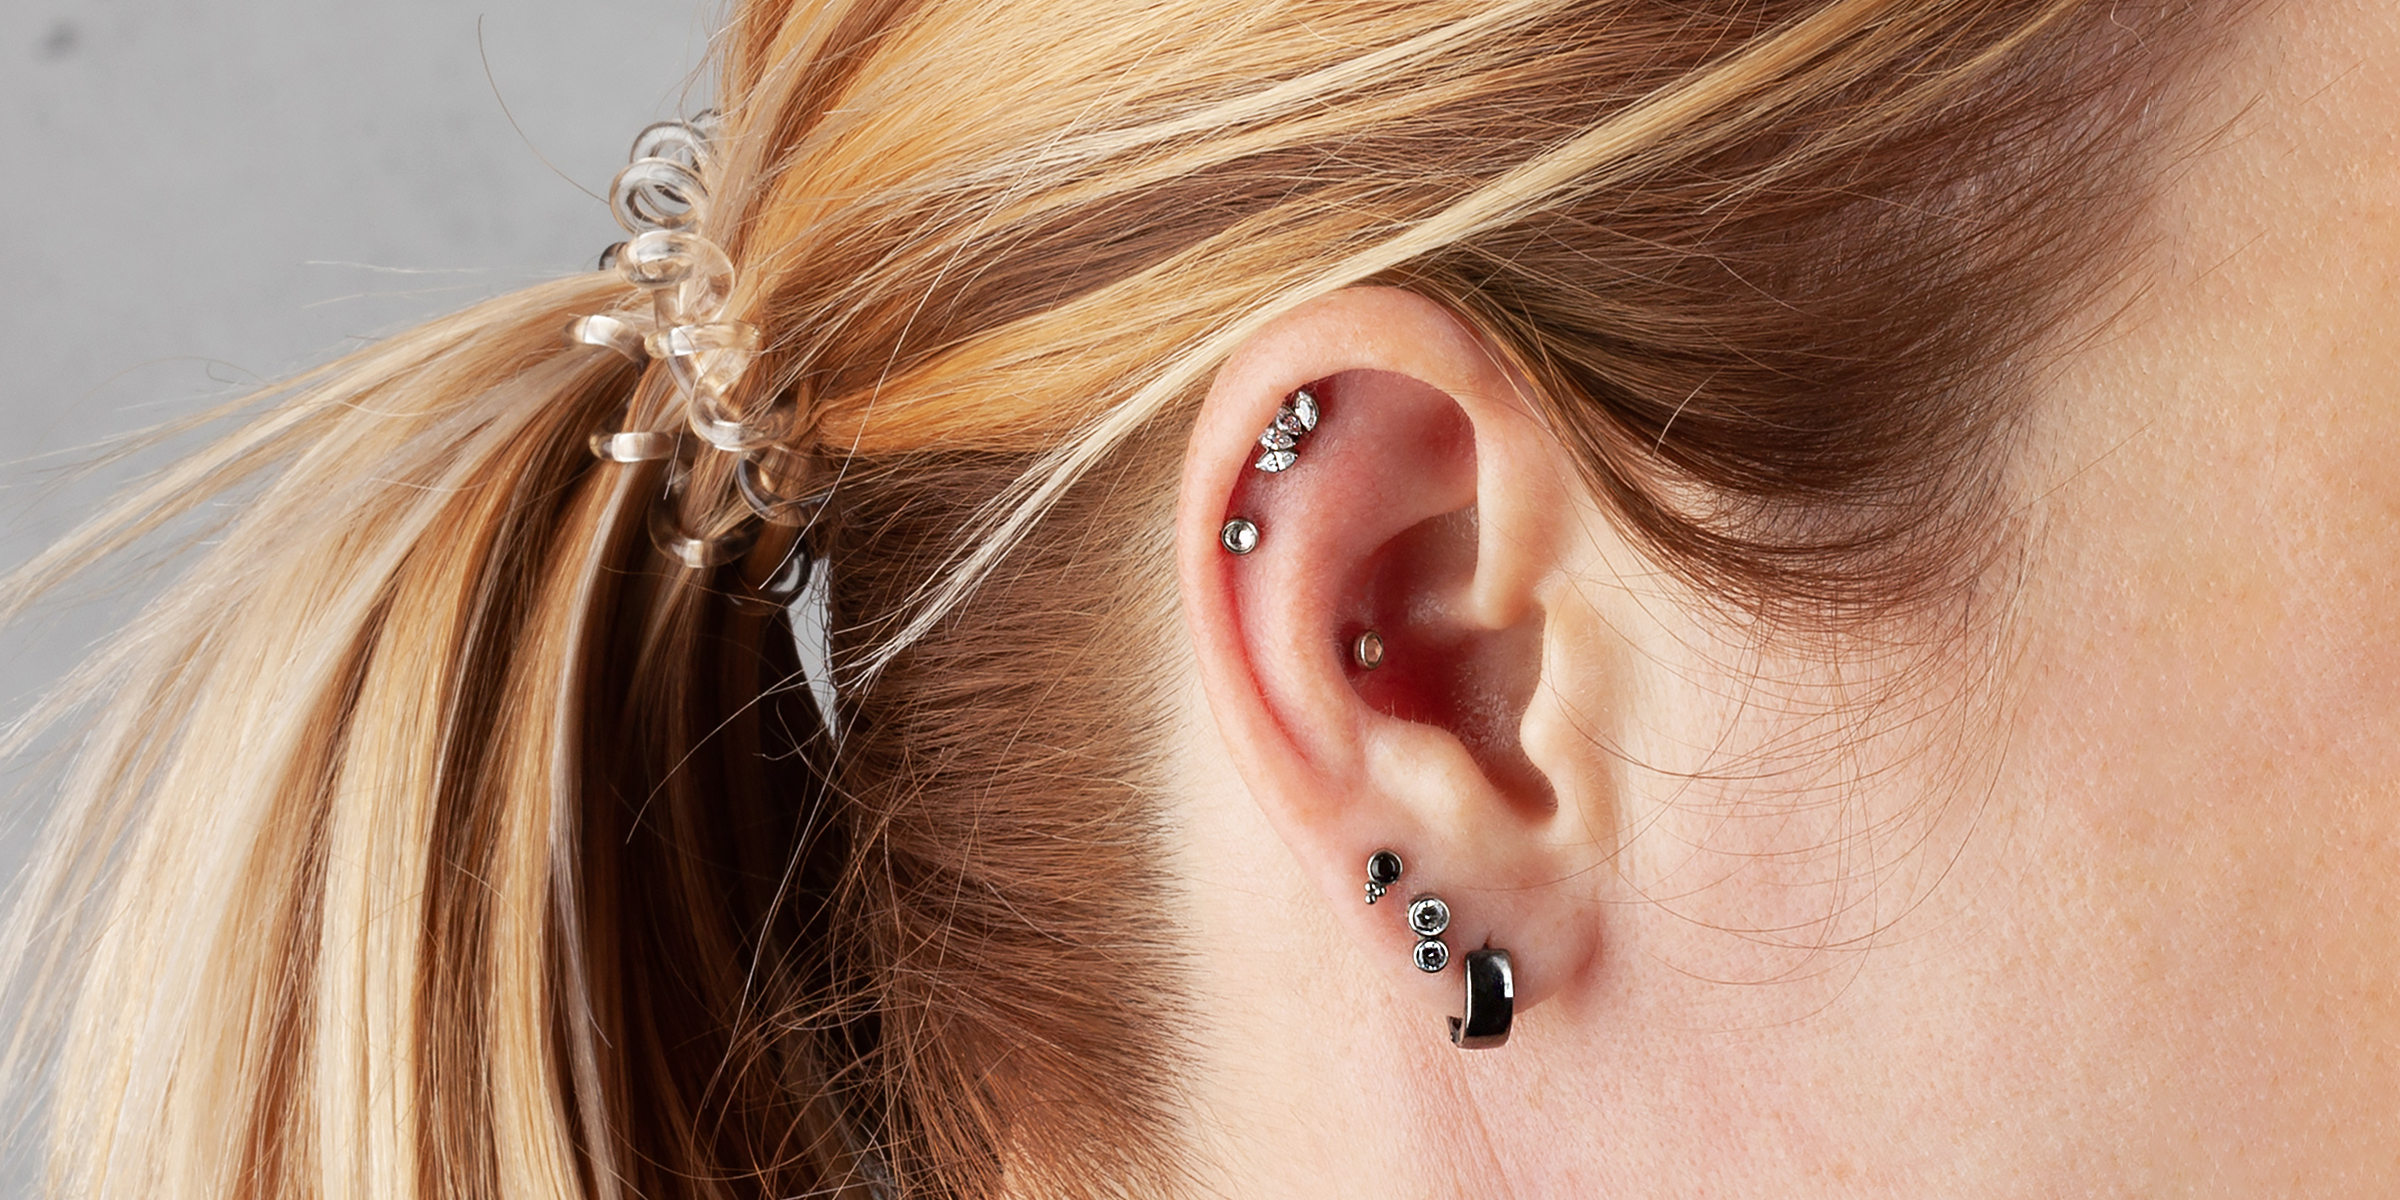 Woman with conch piercing. | Source: Getty Images